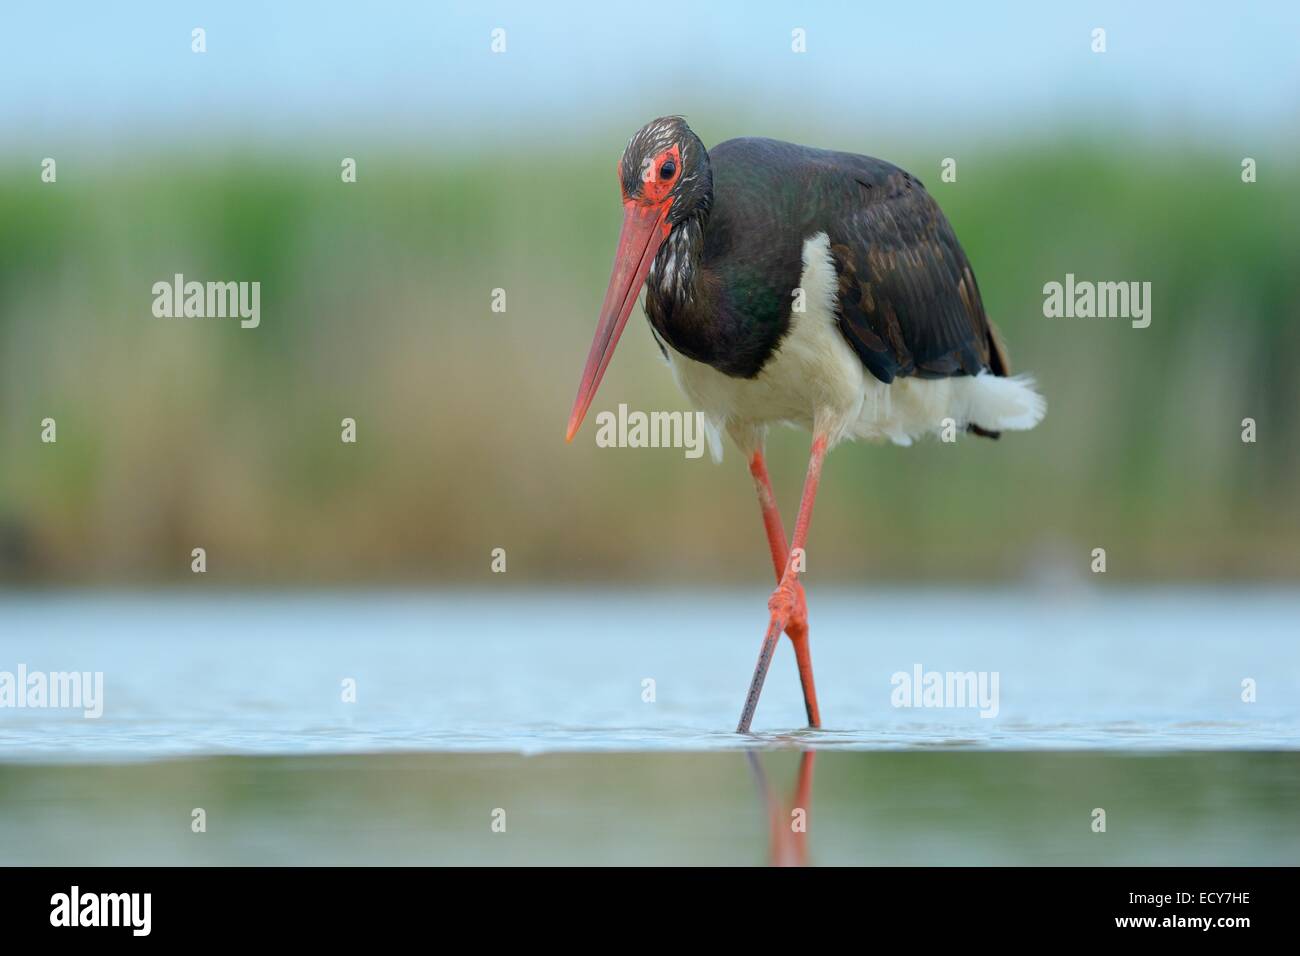 Black Stork (Ciconia nigra), wading in shallow water in search of food, Kiskunság National Park, Hungary Stock Photo